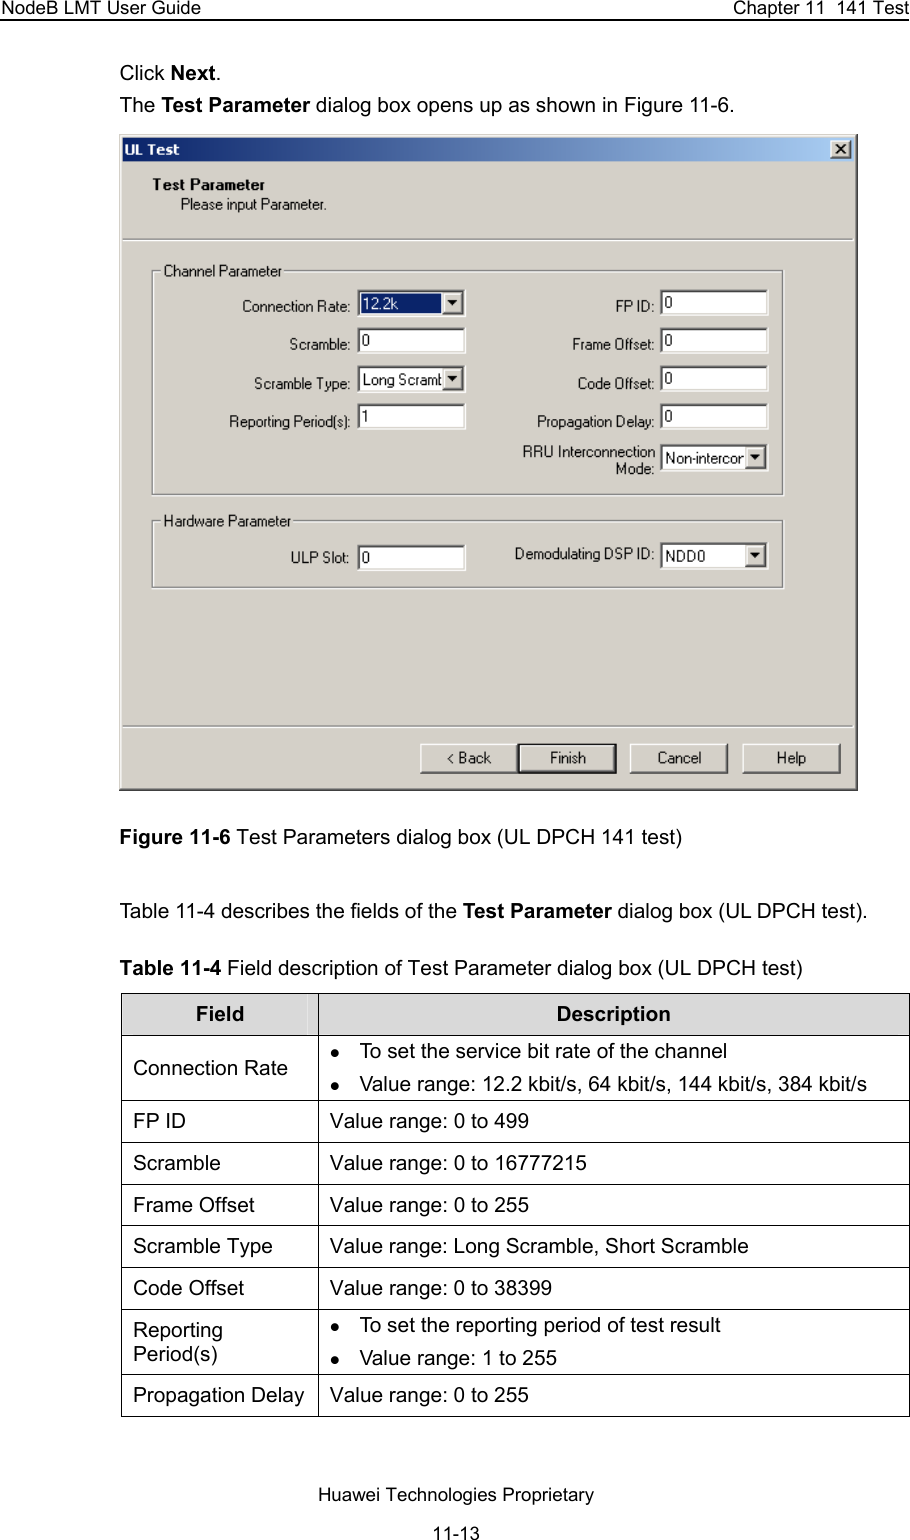 NodeB LMT User Guide  Chapter 11  141 Test Click Next.  The Test Parameter dialog box opens up as shown in Figure 11-6.  Figure 11-6 Test Parameters dialog box (UL DPCH 141 test)  Table 11-4 describes the fields of the Test Parameter dialog box (UL DPCH test).  Table 11-4 Field description of Test Parameter dialog box (UL DPCH test) Field   Description  Connection Rate z To set the service bit rate of the channel  z Value range: 12.2 kbit/s, 64 kbit/s, 144 kbit/s, 384 kbit/s FP ID  Value range: 0 to 499 Scramble  Value range: 0 to 16777215 Frame Offset  Value range: 0 to 255 Scramble Type   Value range: Long Scramble, Short Scramble  Code Offset  Value range: 0 to 38399 Reporting Period(s) z To set the reporting period of test result z Value range: 1 to 255 Propagation Delay  Value range: 0 to 255 Huawei Technologies Proprietary 11-13 